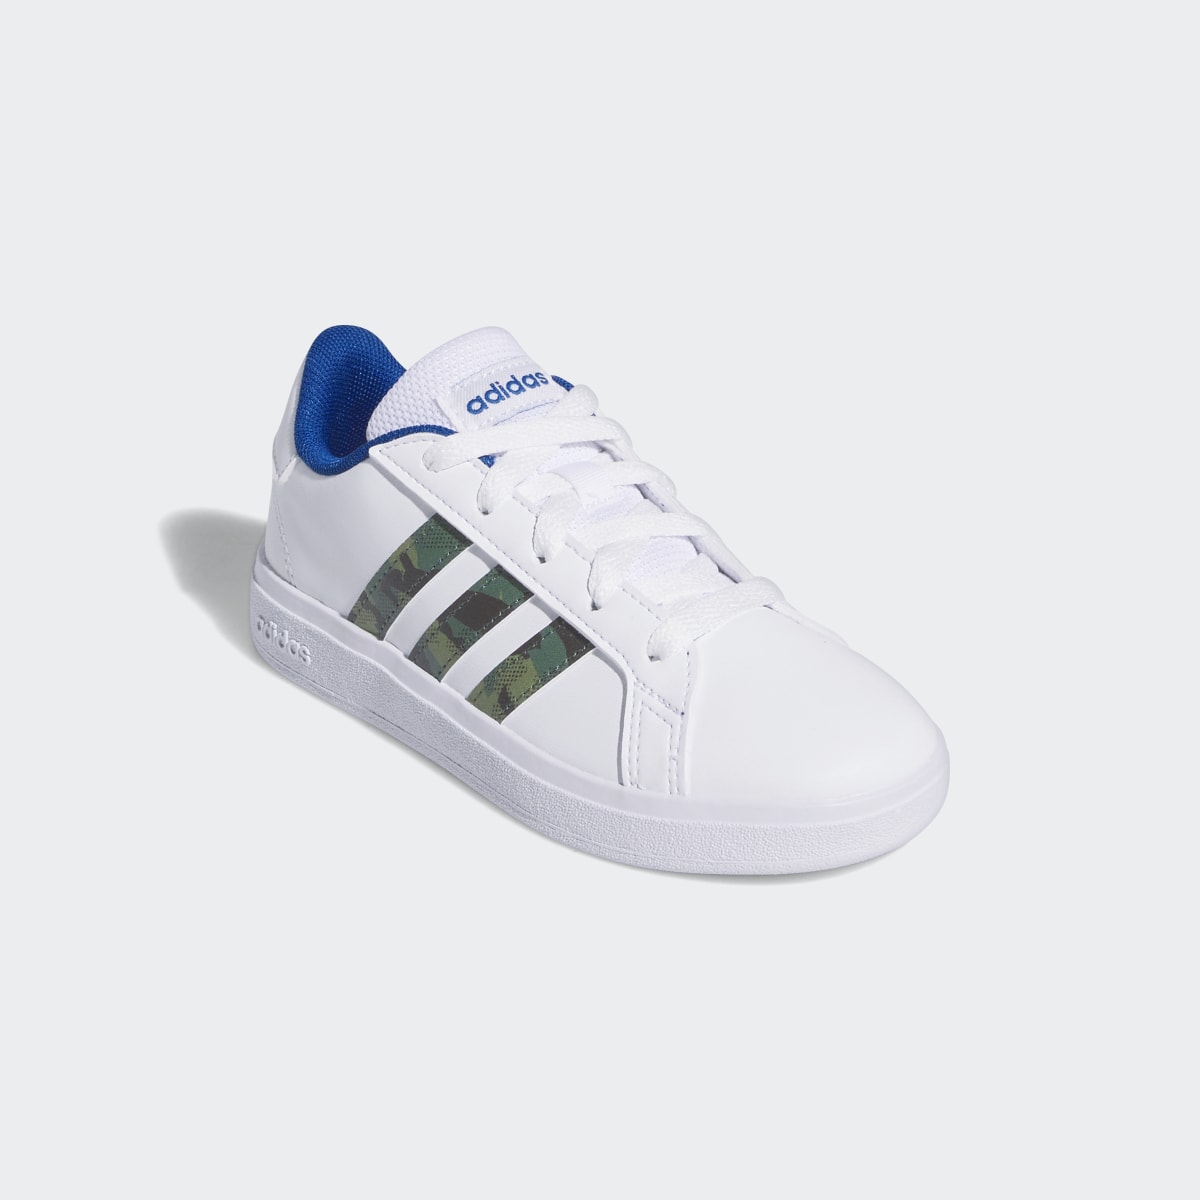 Adidas Grand Court Lifestyle Lace Tennis Schuh. 5